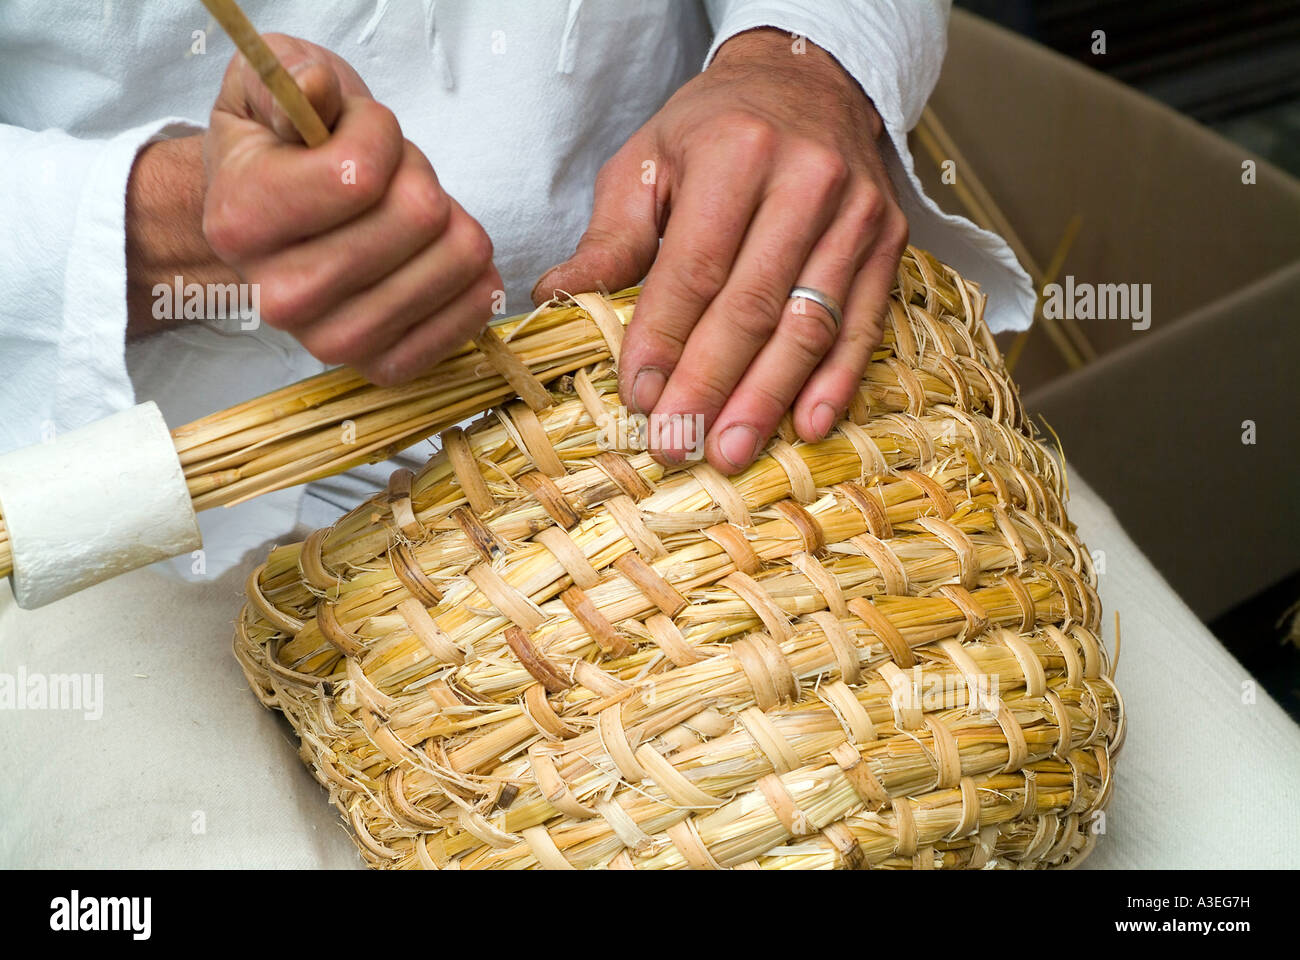 A Beekeeper weaves a beehive Stock Photo